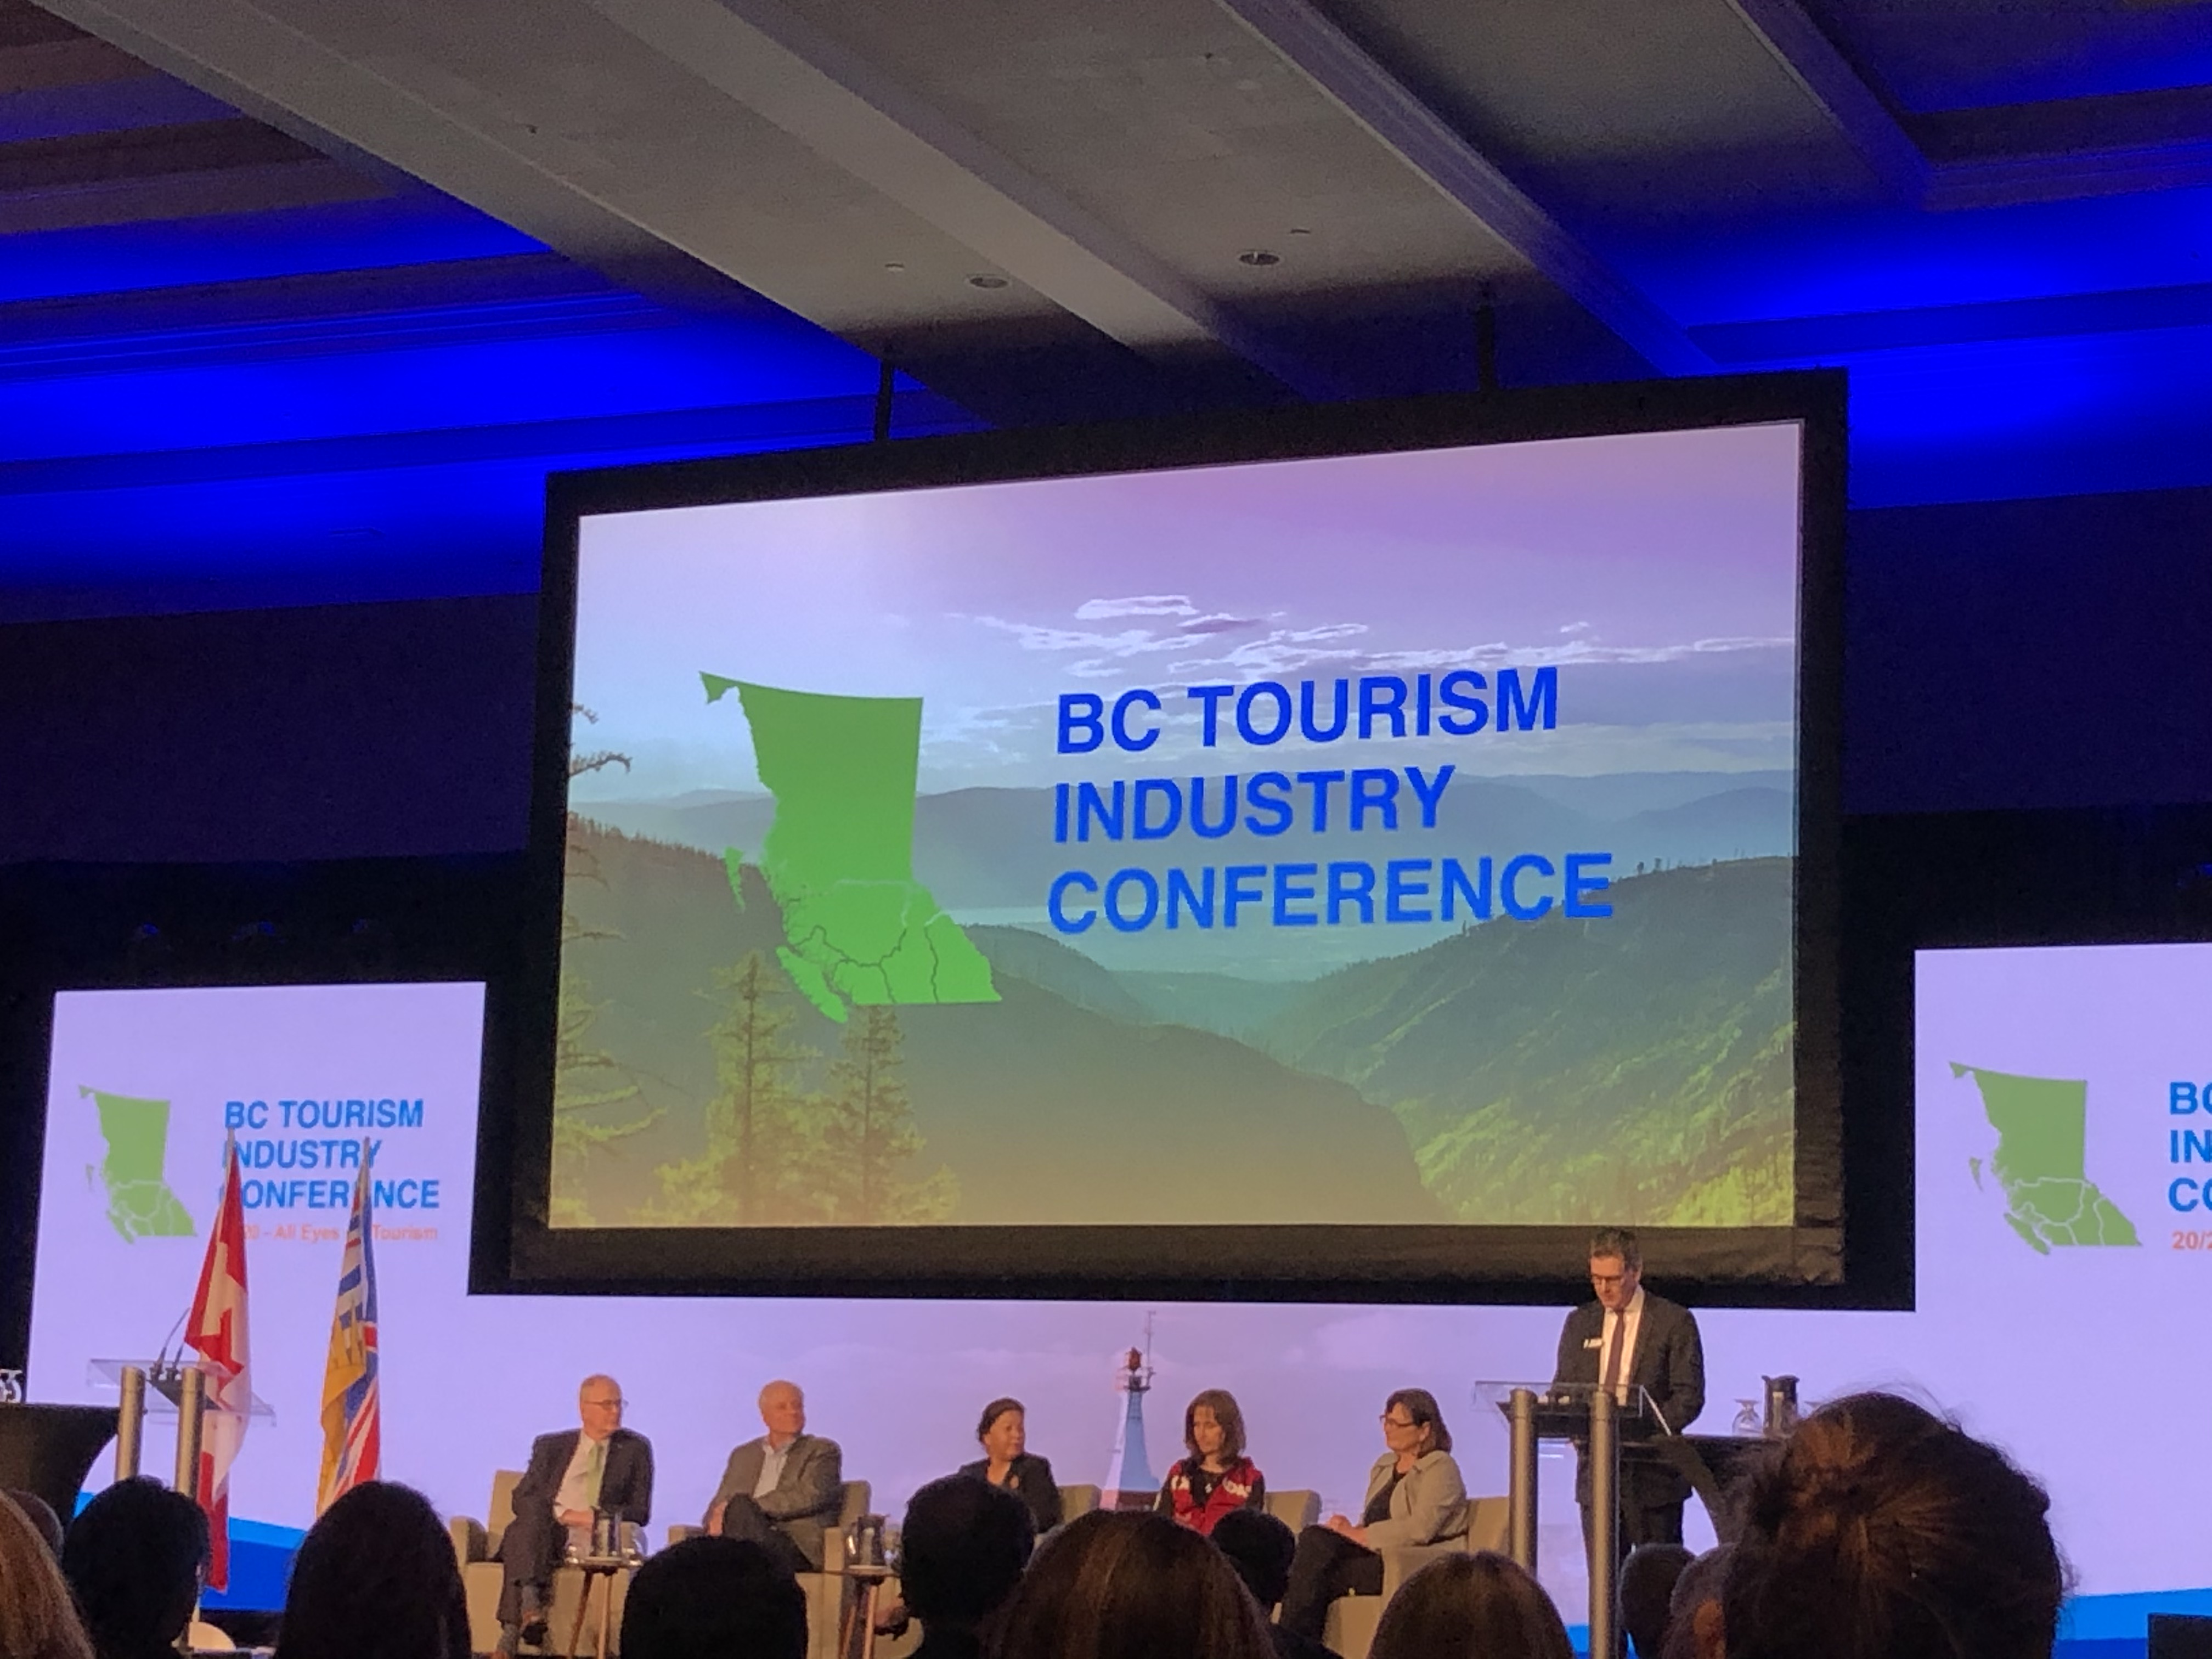 BC Tourism Industry Conference coming to PG next year My Prince